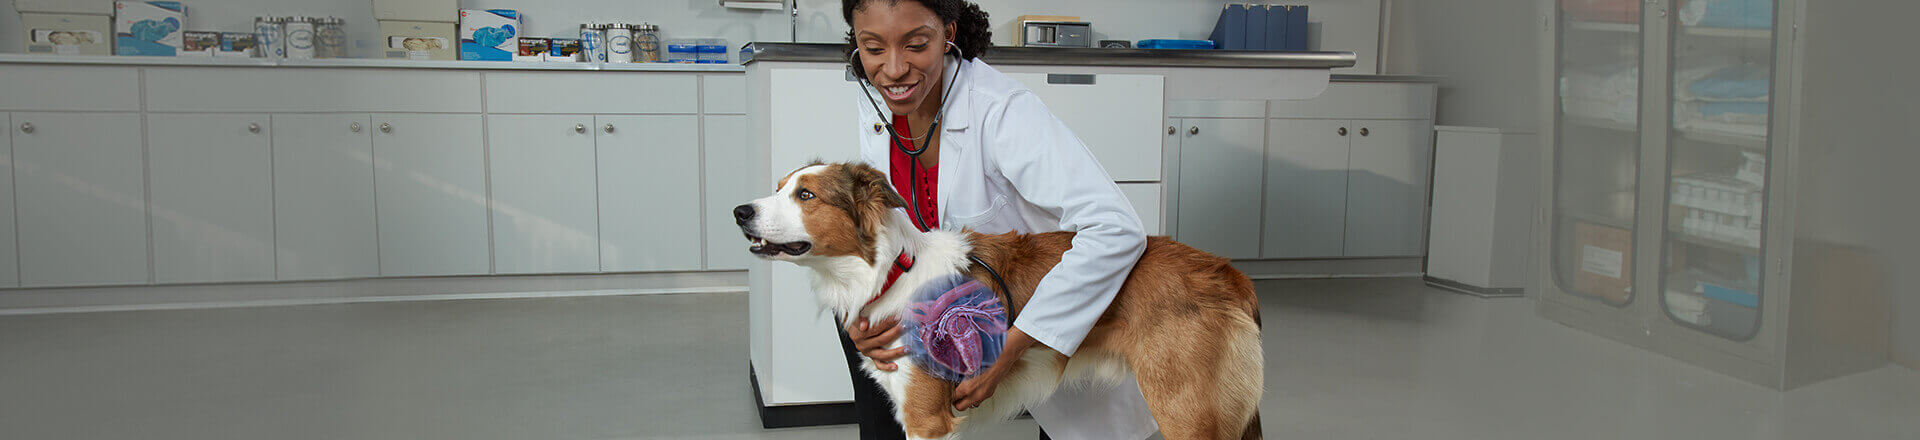 Veterinarian with dog with heartworm illustration on dog's chest